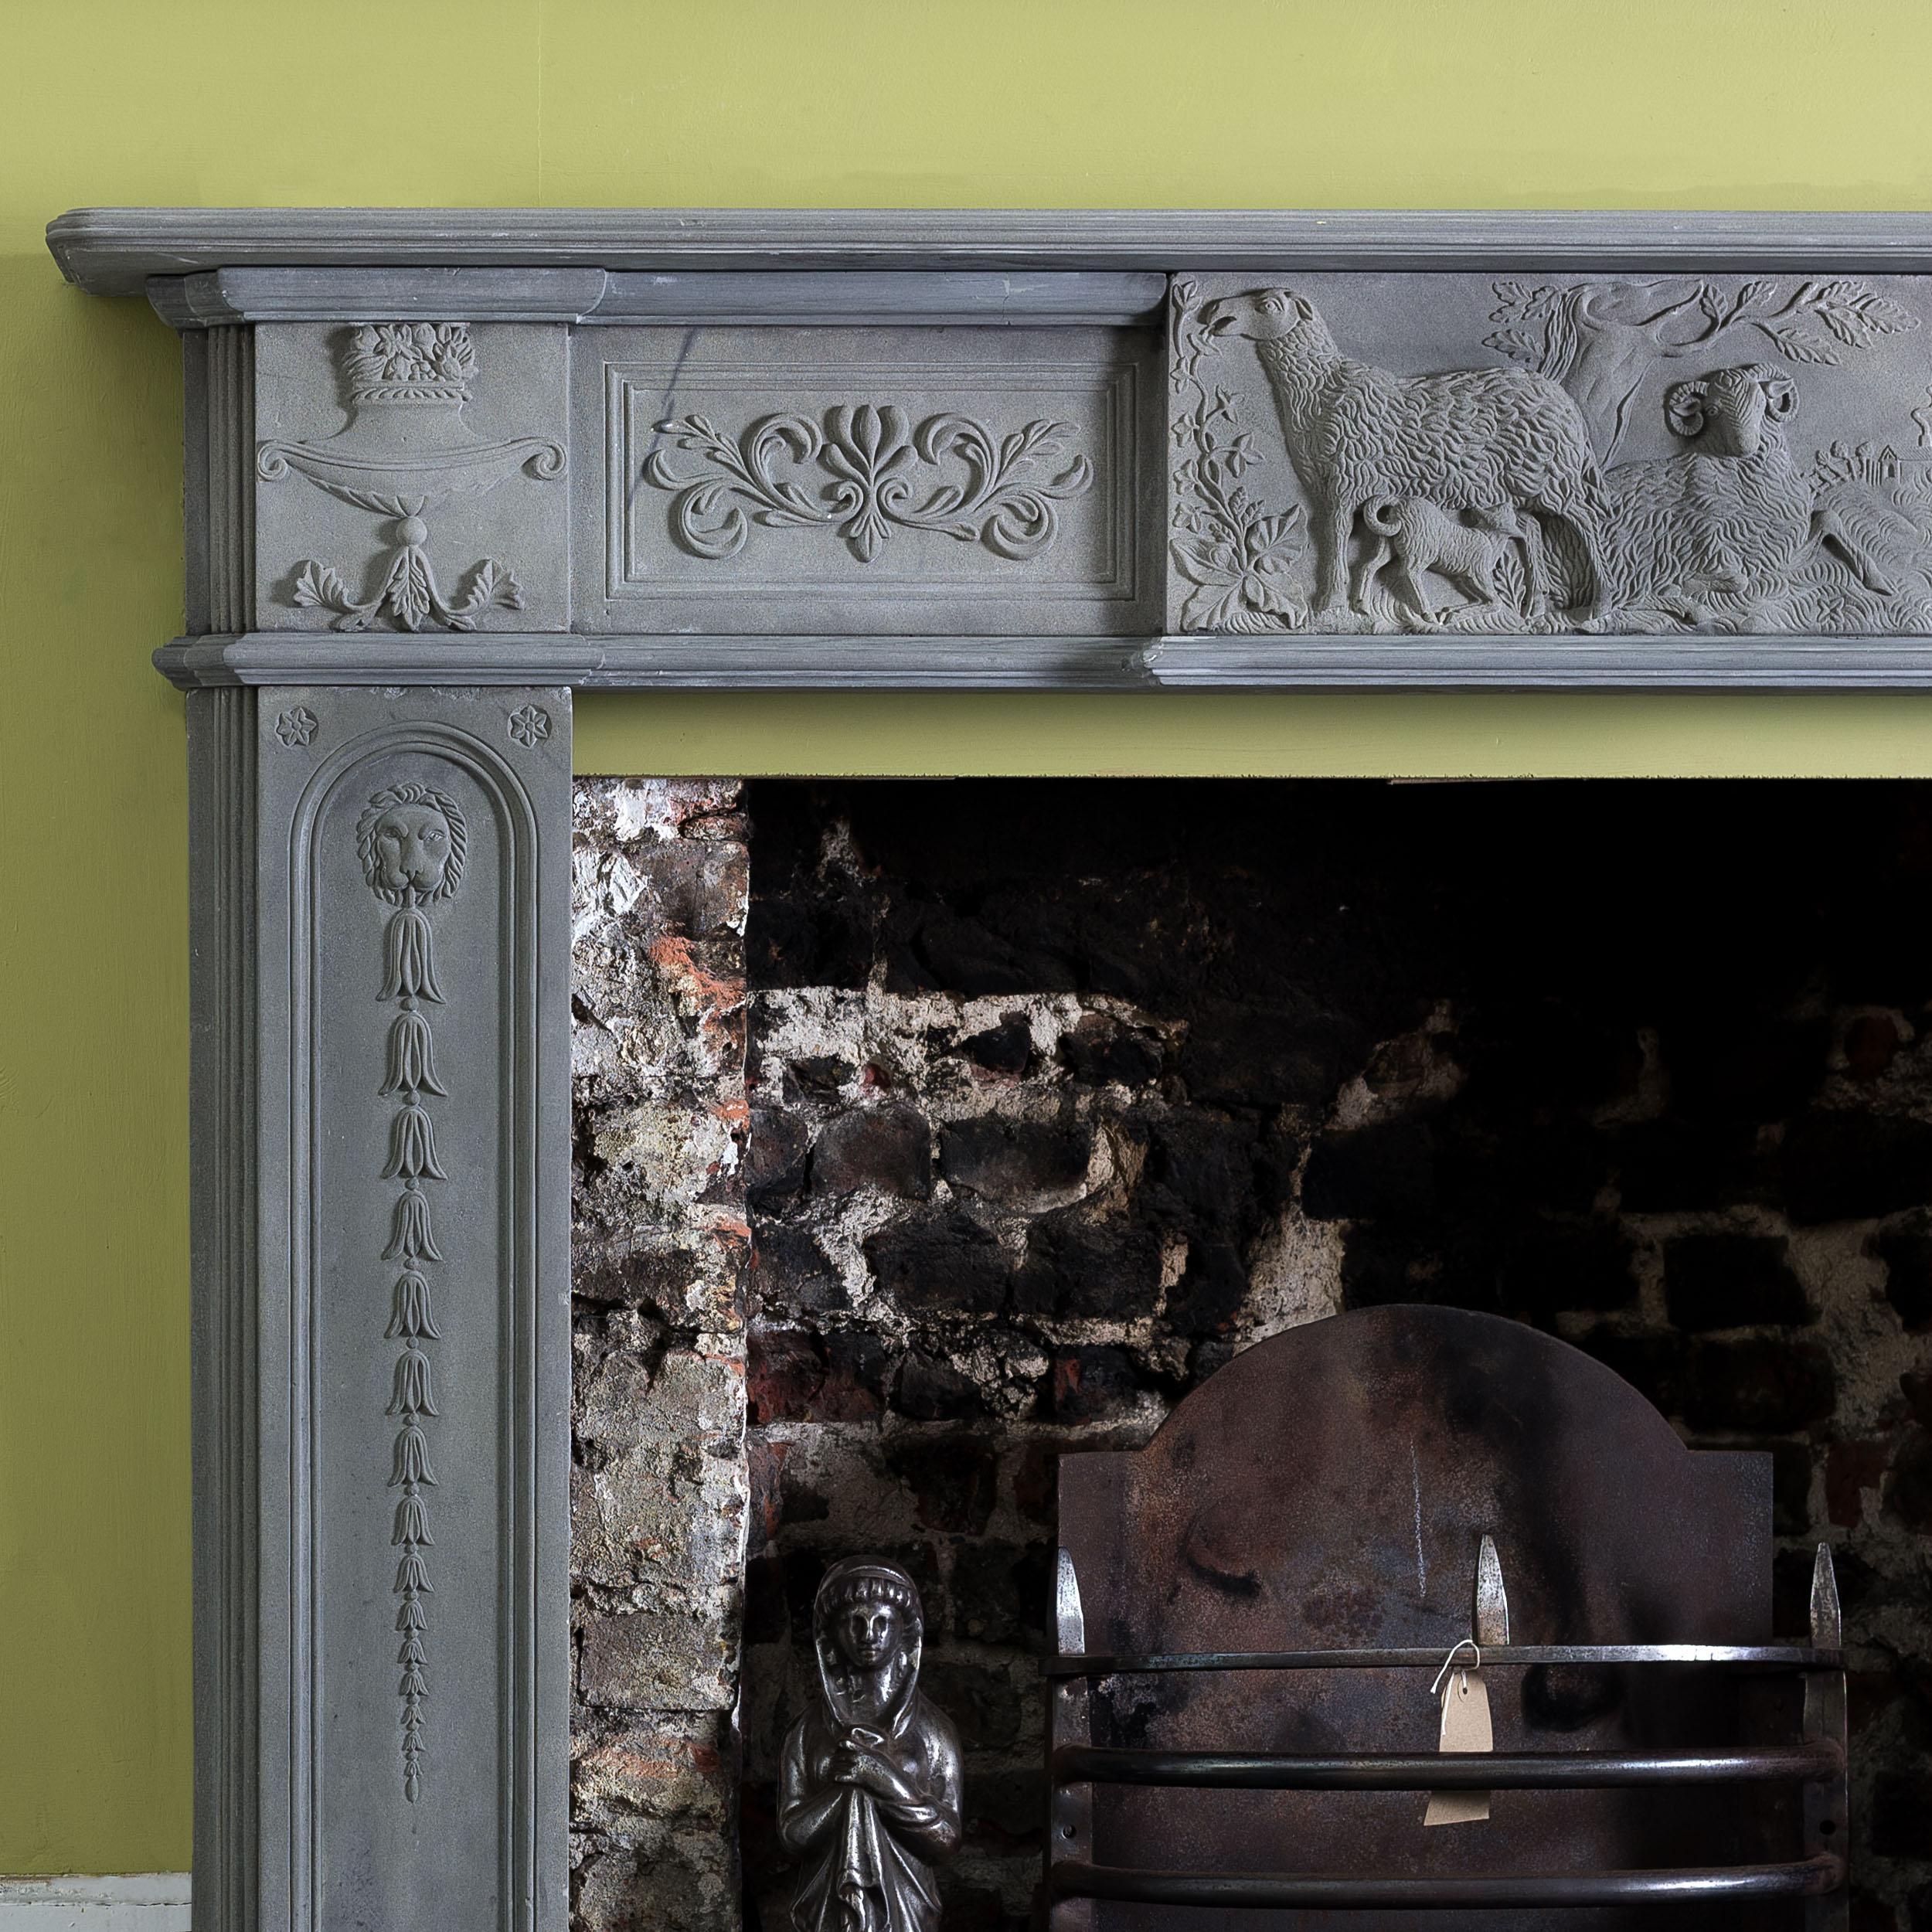 A fine and important late Georgian Scottish stone fireplace,
an innovative transitional design emblematic of the renewed interest in Greek architectural motifs in the late 18 century which would culminate in what is now referred to as the Regency